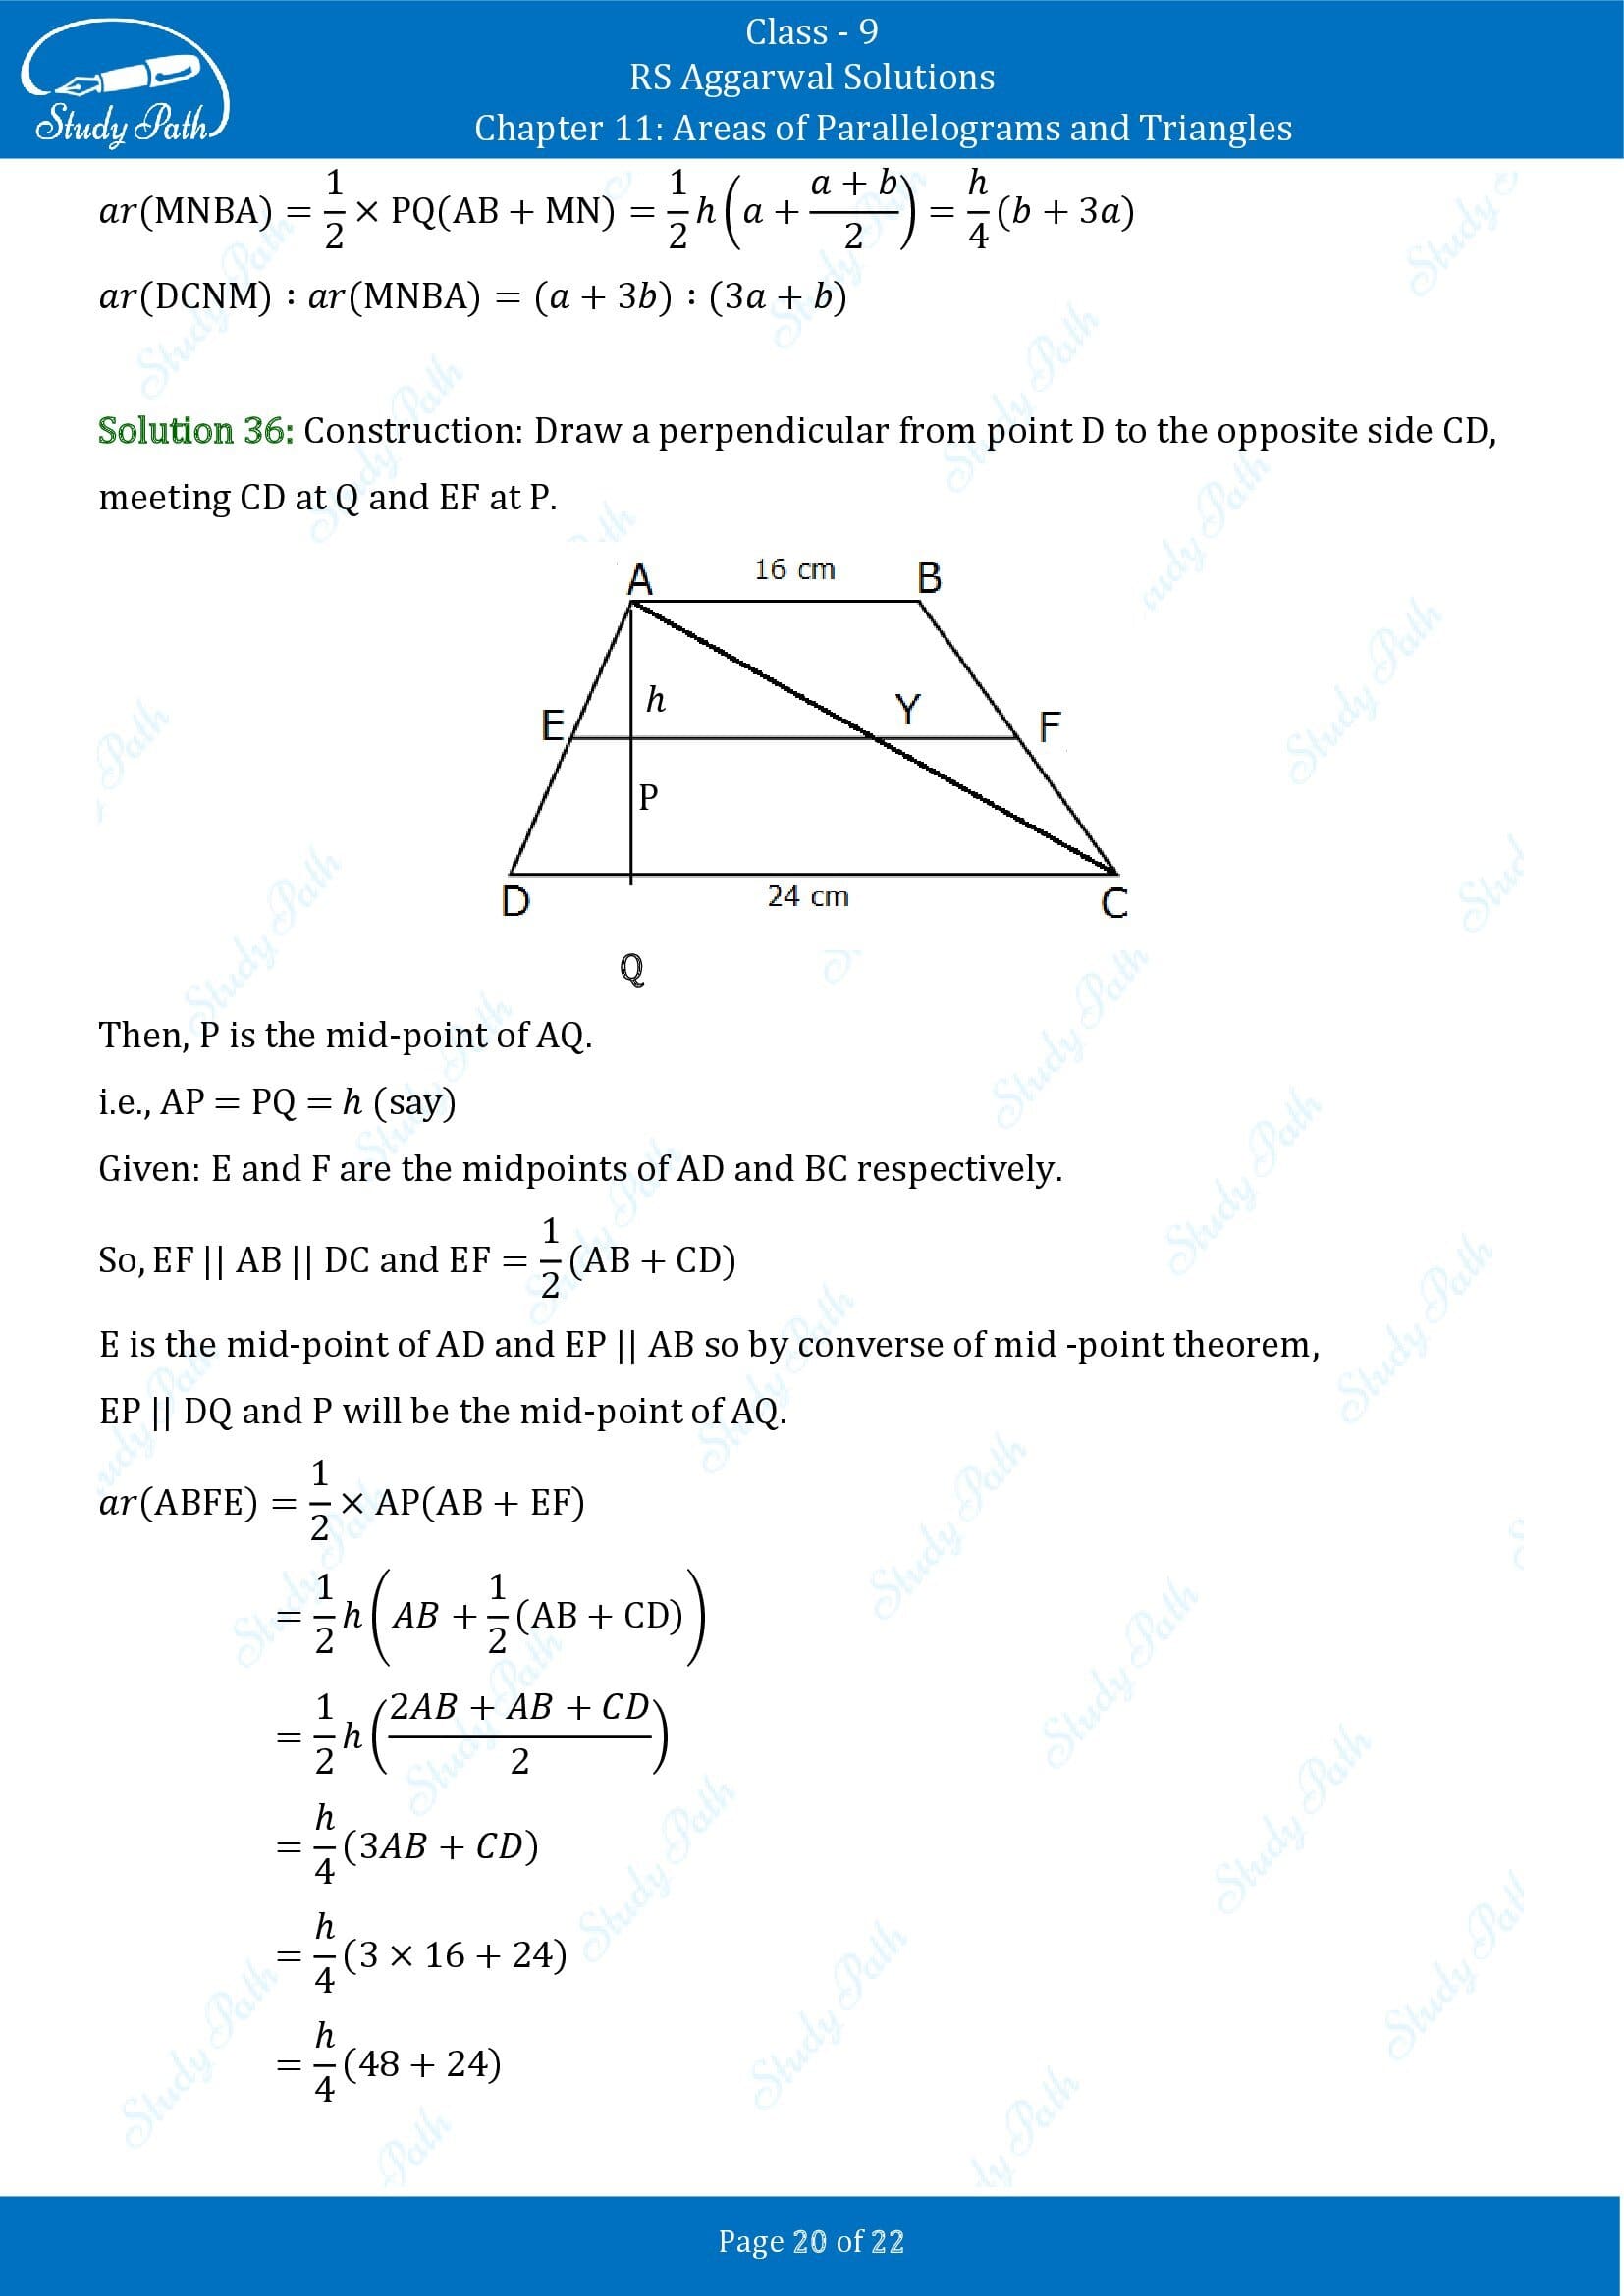 RS Aggarwal Solutions Class 9 Chapter 11 Areas of Parallelograms and Triangles Exercise 11 00020